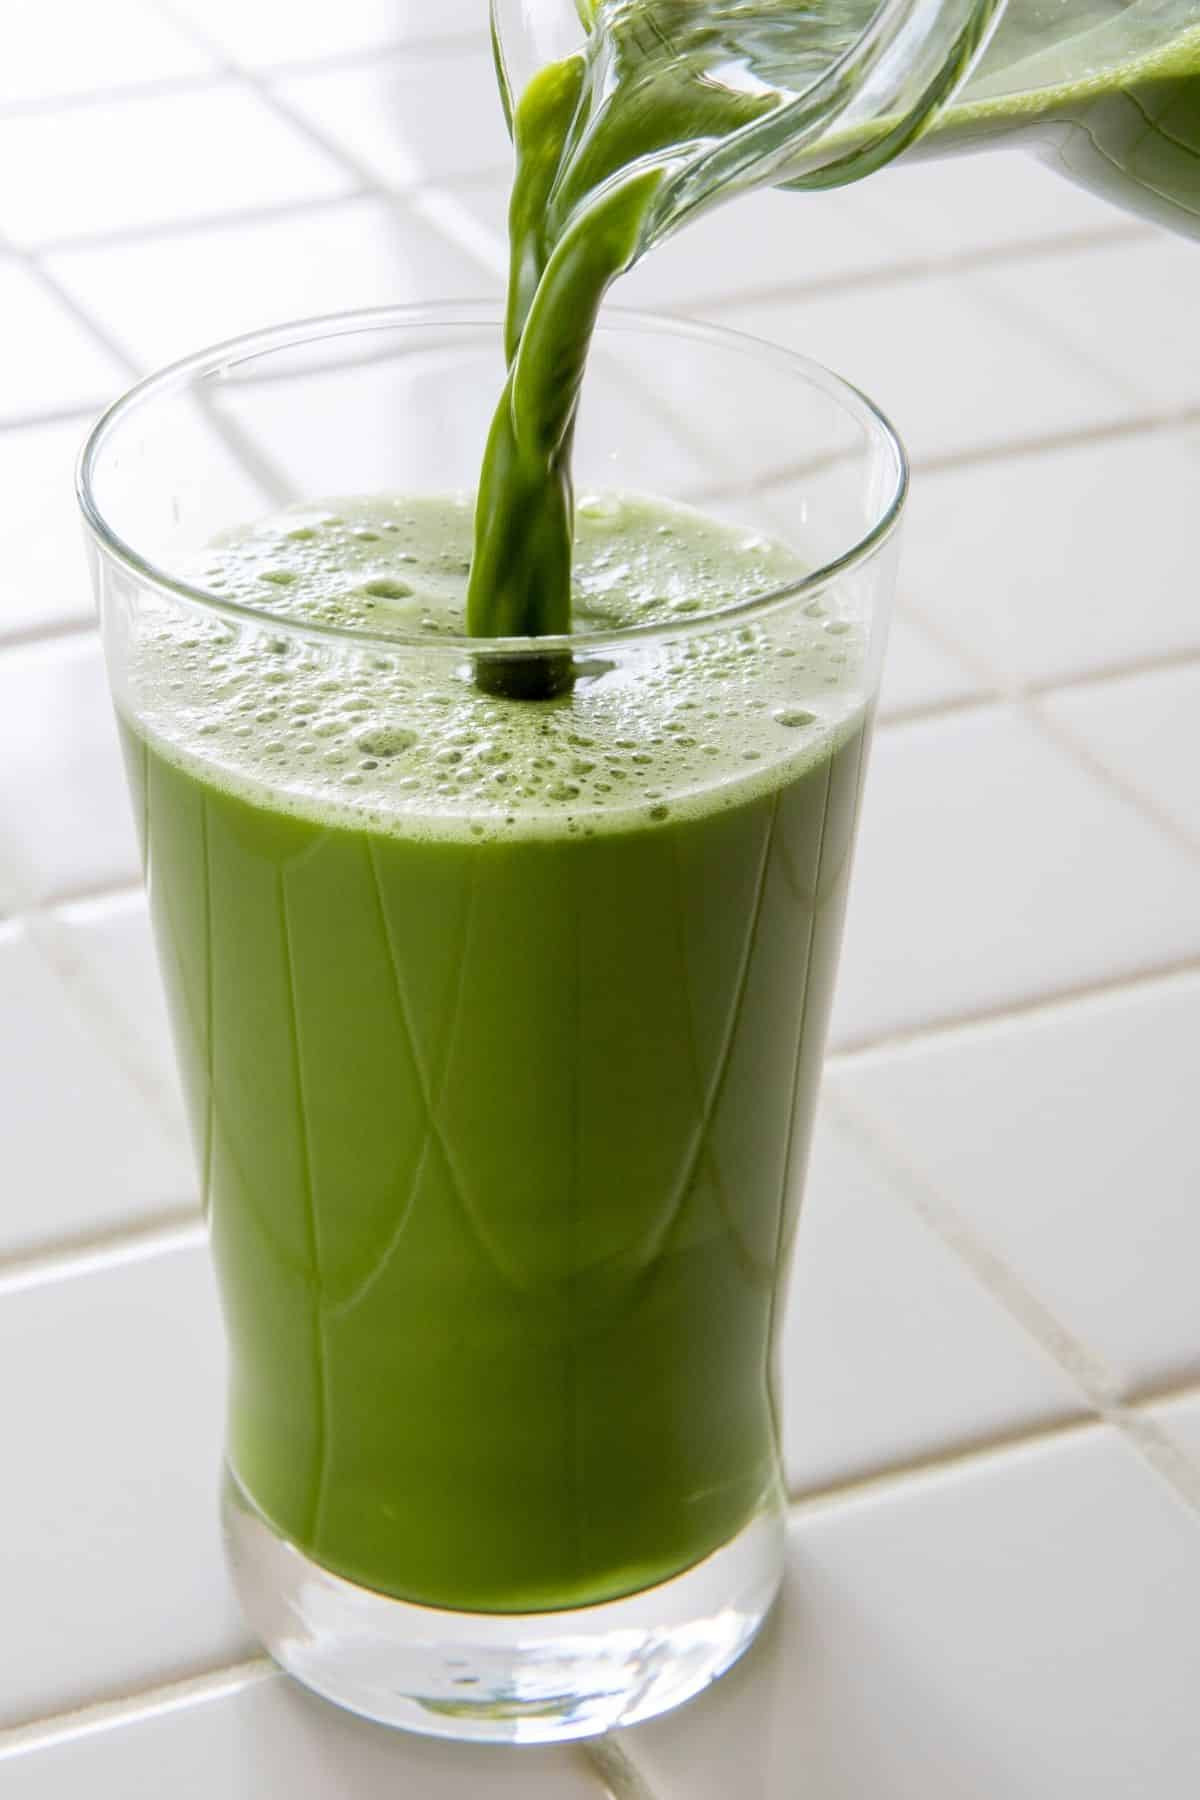 pouring detox vegetable green juice into glass.